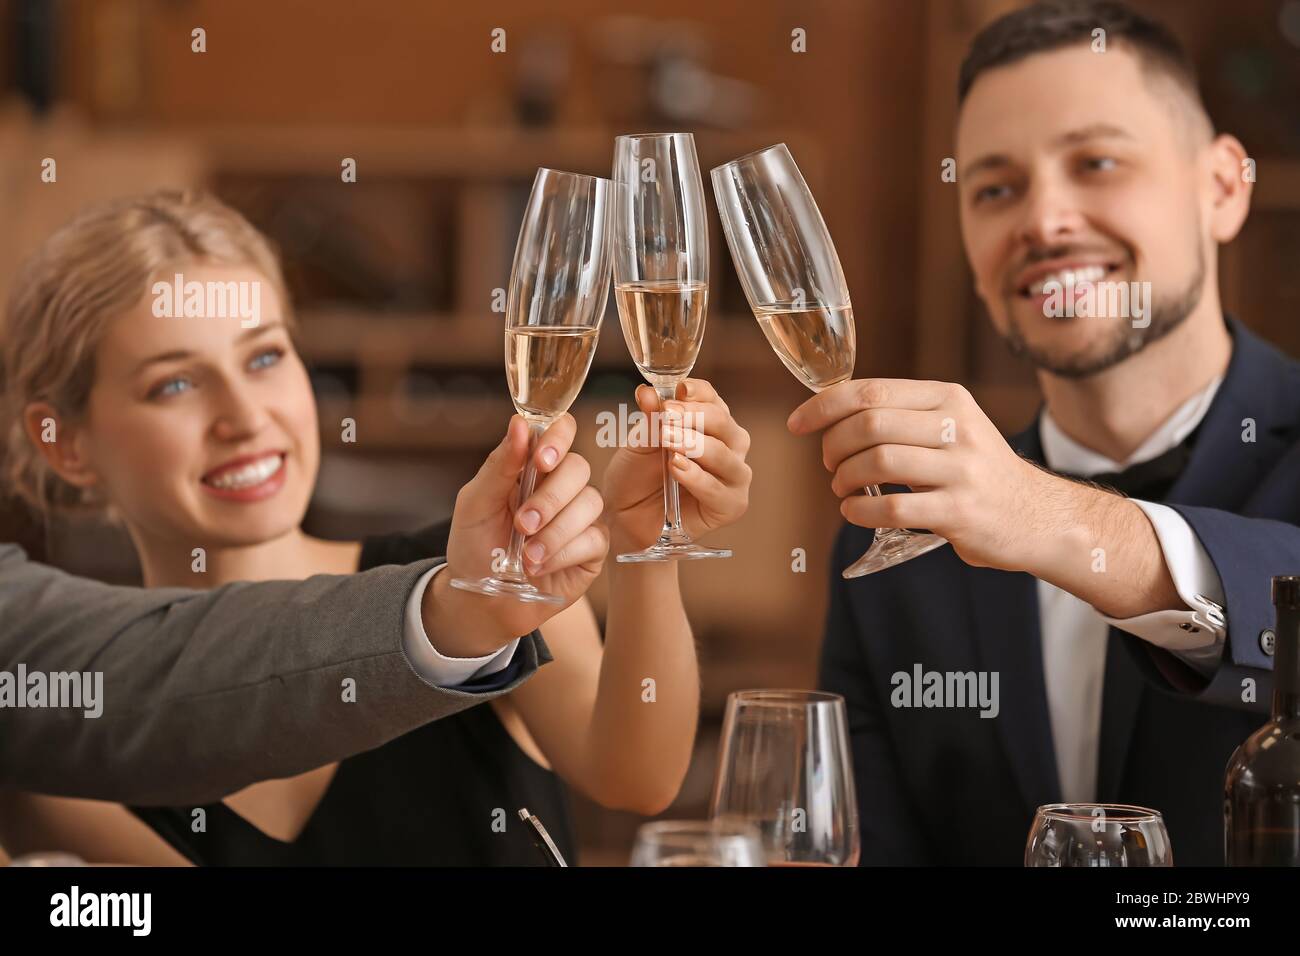 People tasting wine at the restaurant Stock Photo